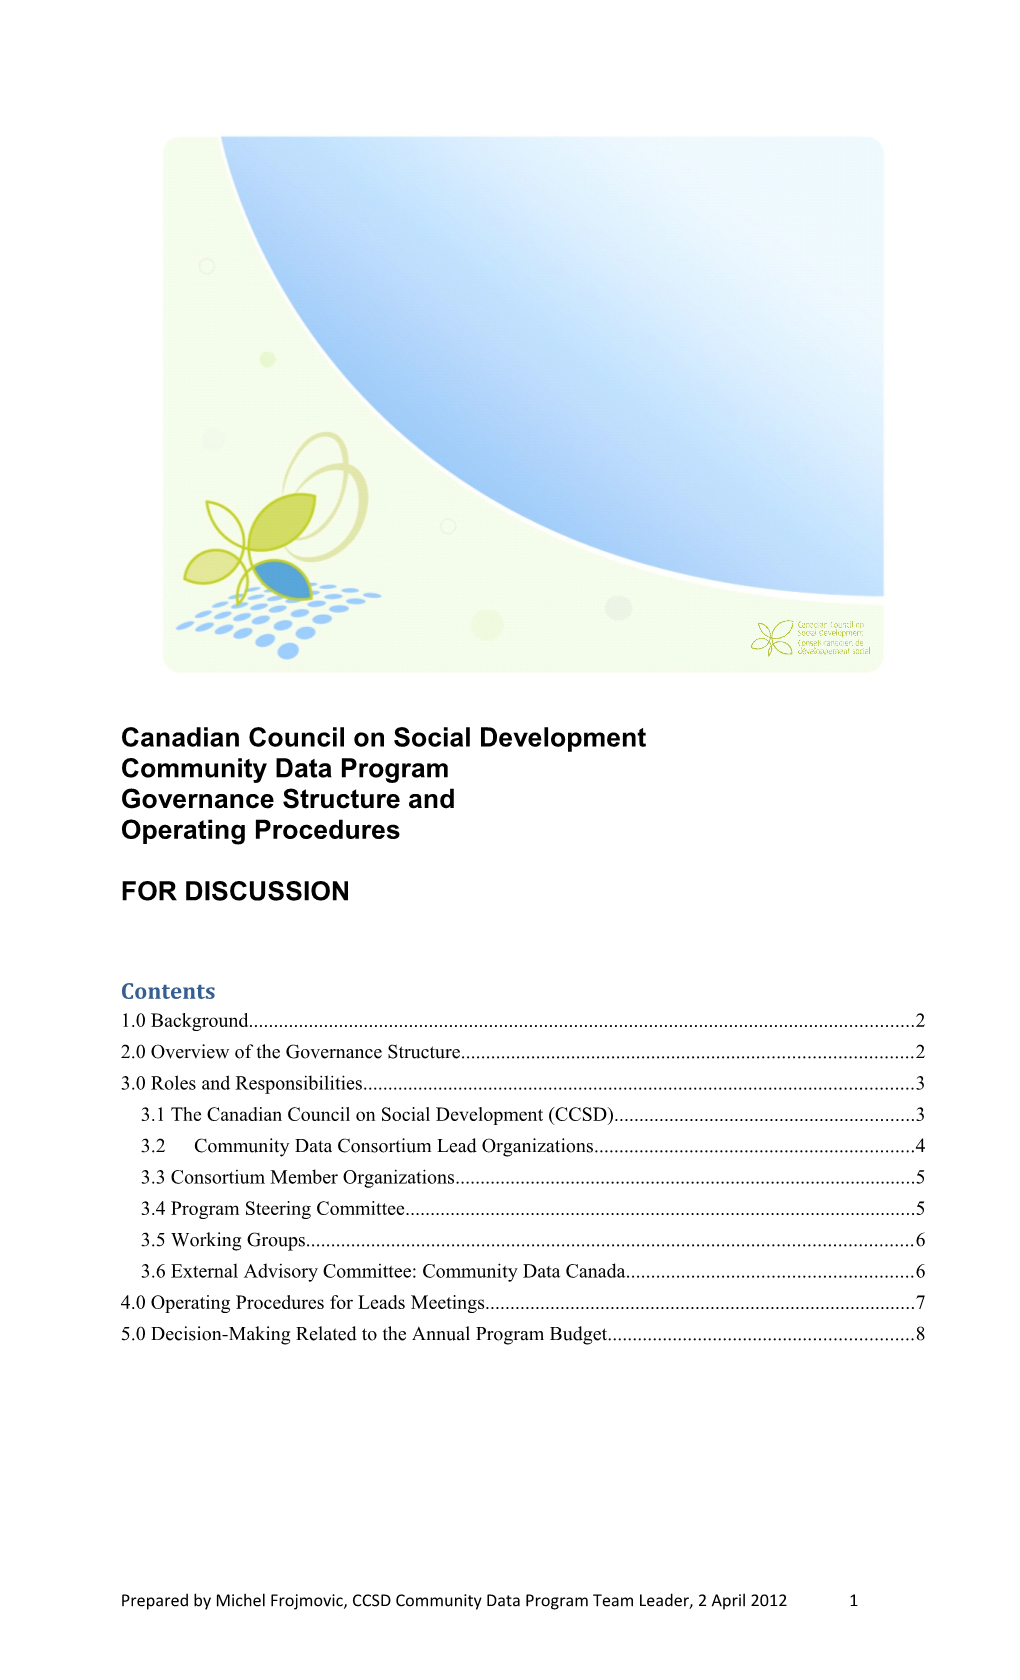 Municipal and Community Data Access Project Working Document